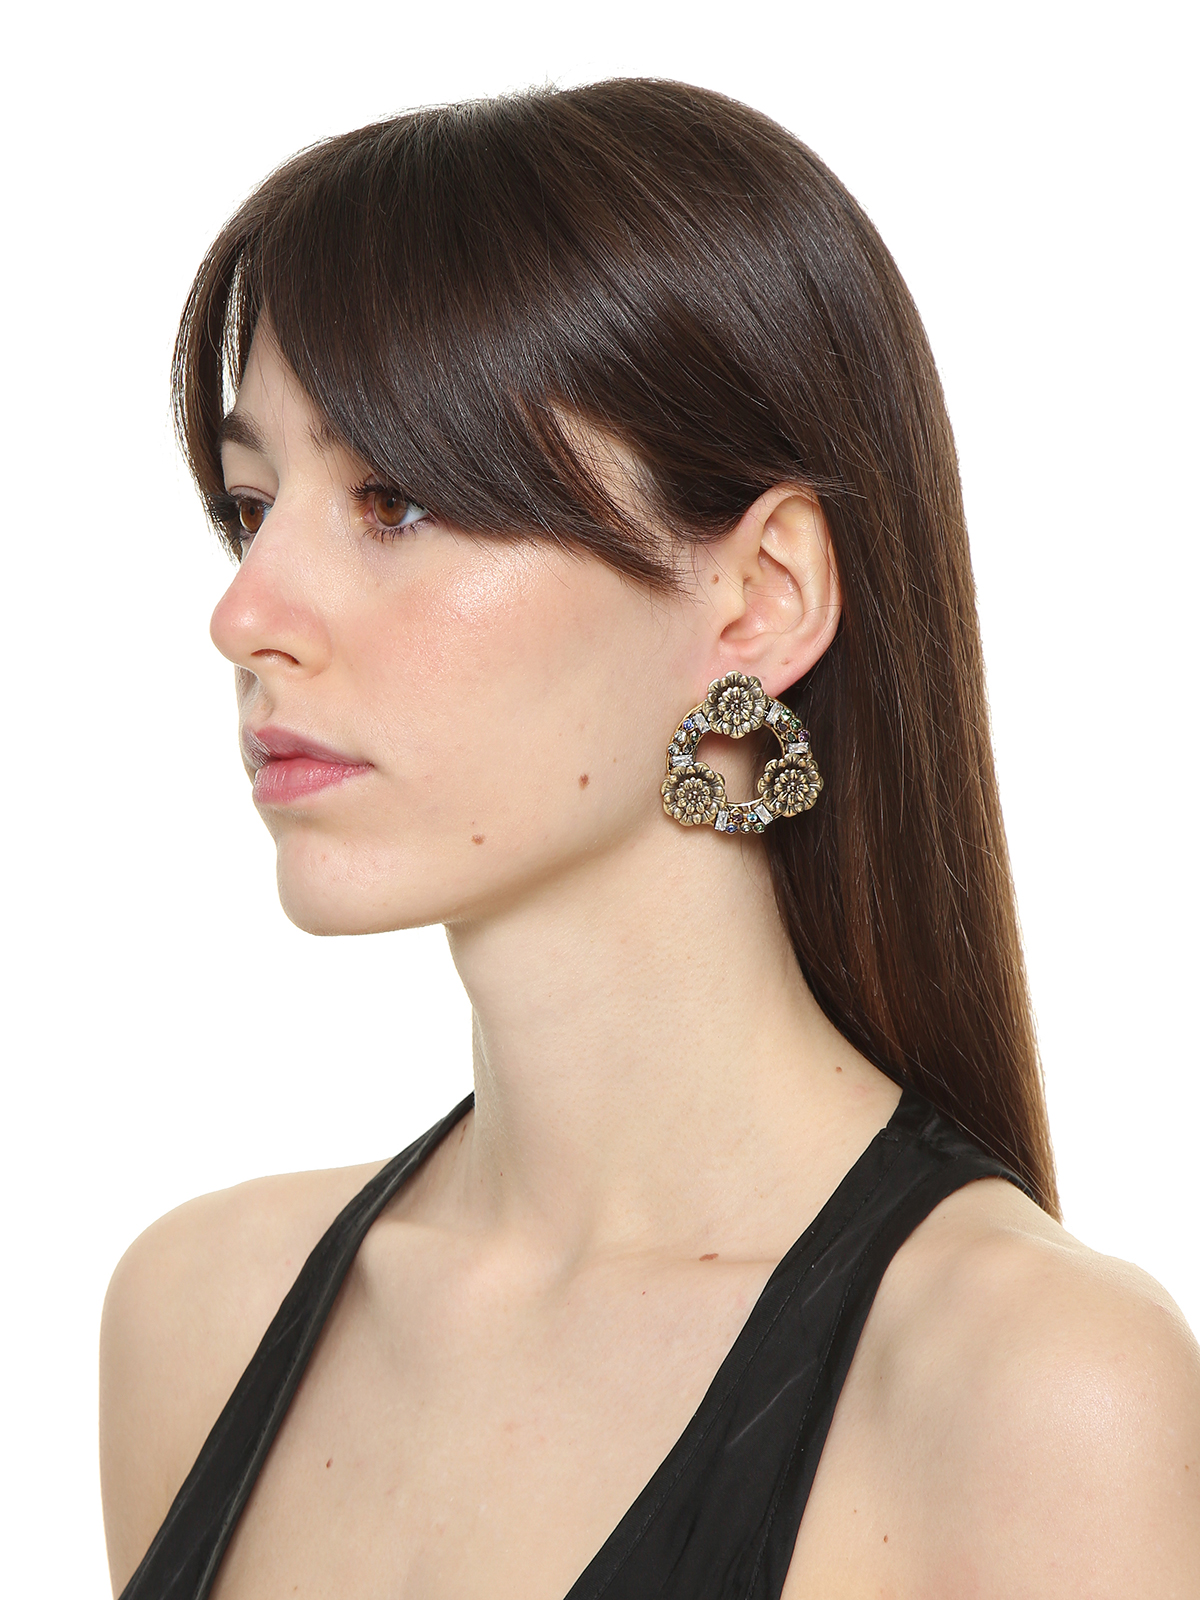 Hoop earrings embellished with flowers and multicolor stones 